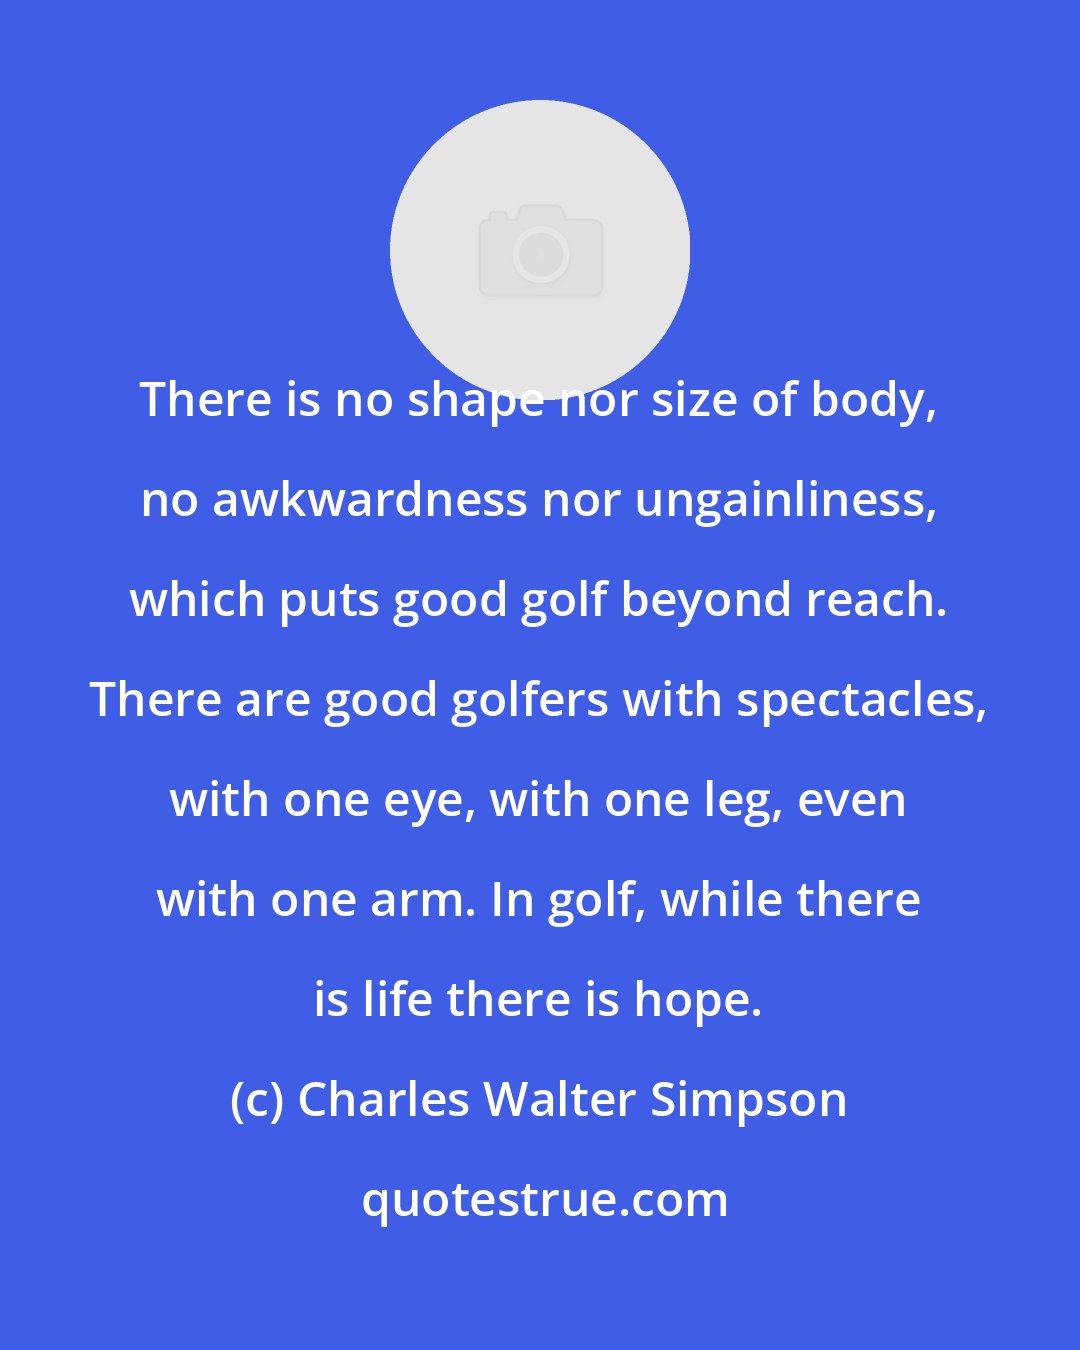 Charles Walter Simpson: There is no shape nor size of body, no awkwardness nor ungainliness, which puts good golf beyond reach. There are good golfers with spectacles, with one eye, with one leg, even with one arm. In golf, while there is life there is hope.